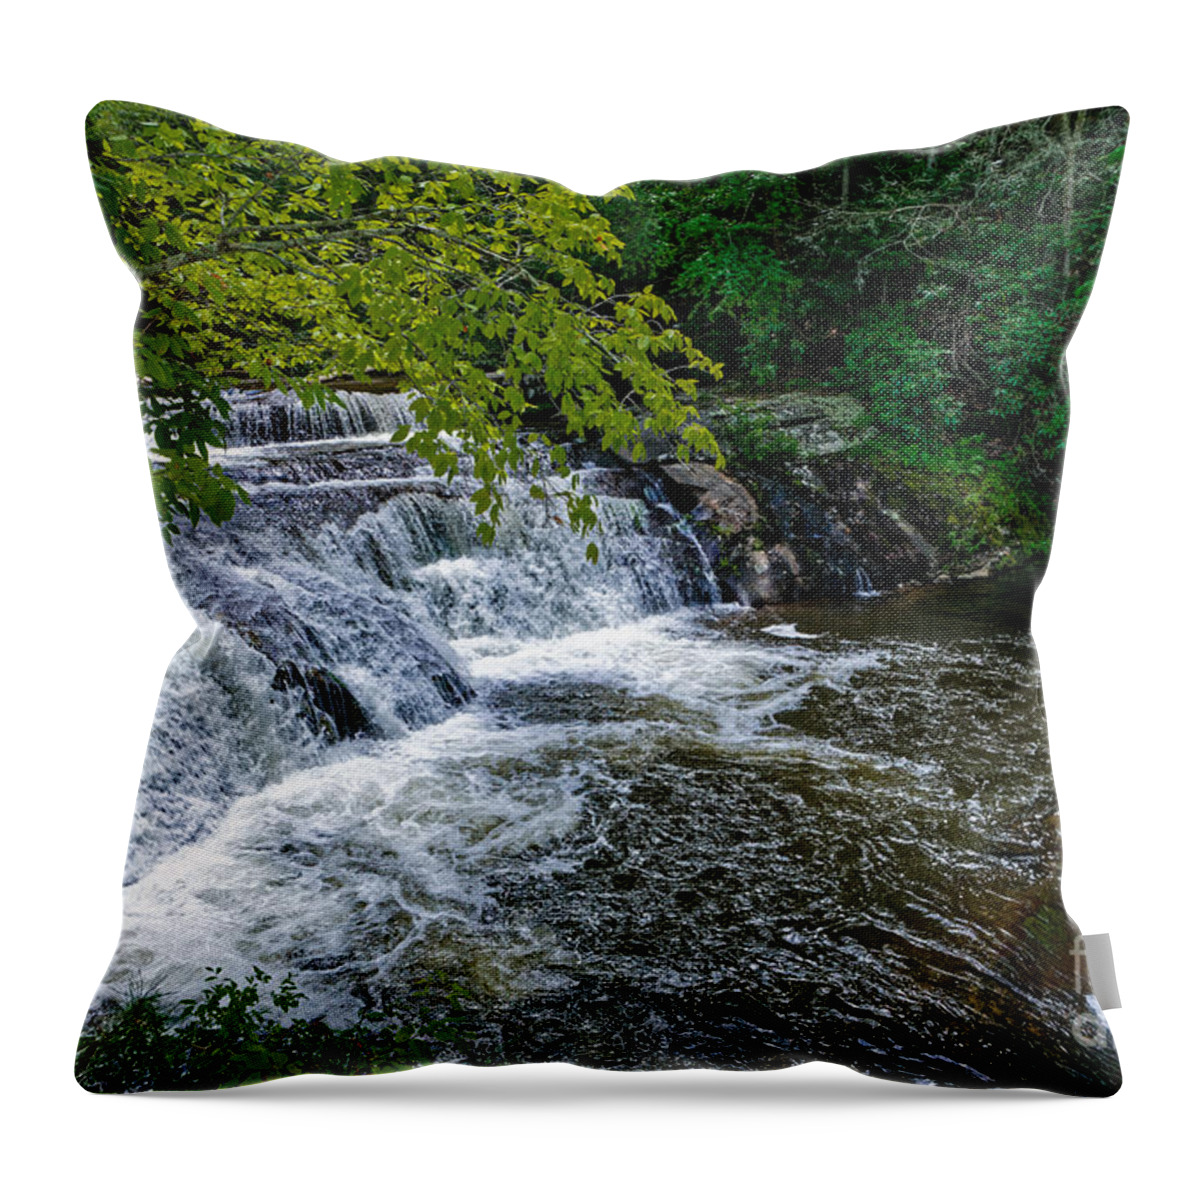 Bald River Throw Pillow featuring the photograph Bald River #1 by Paul Mashburn